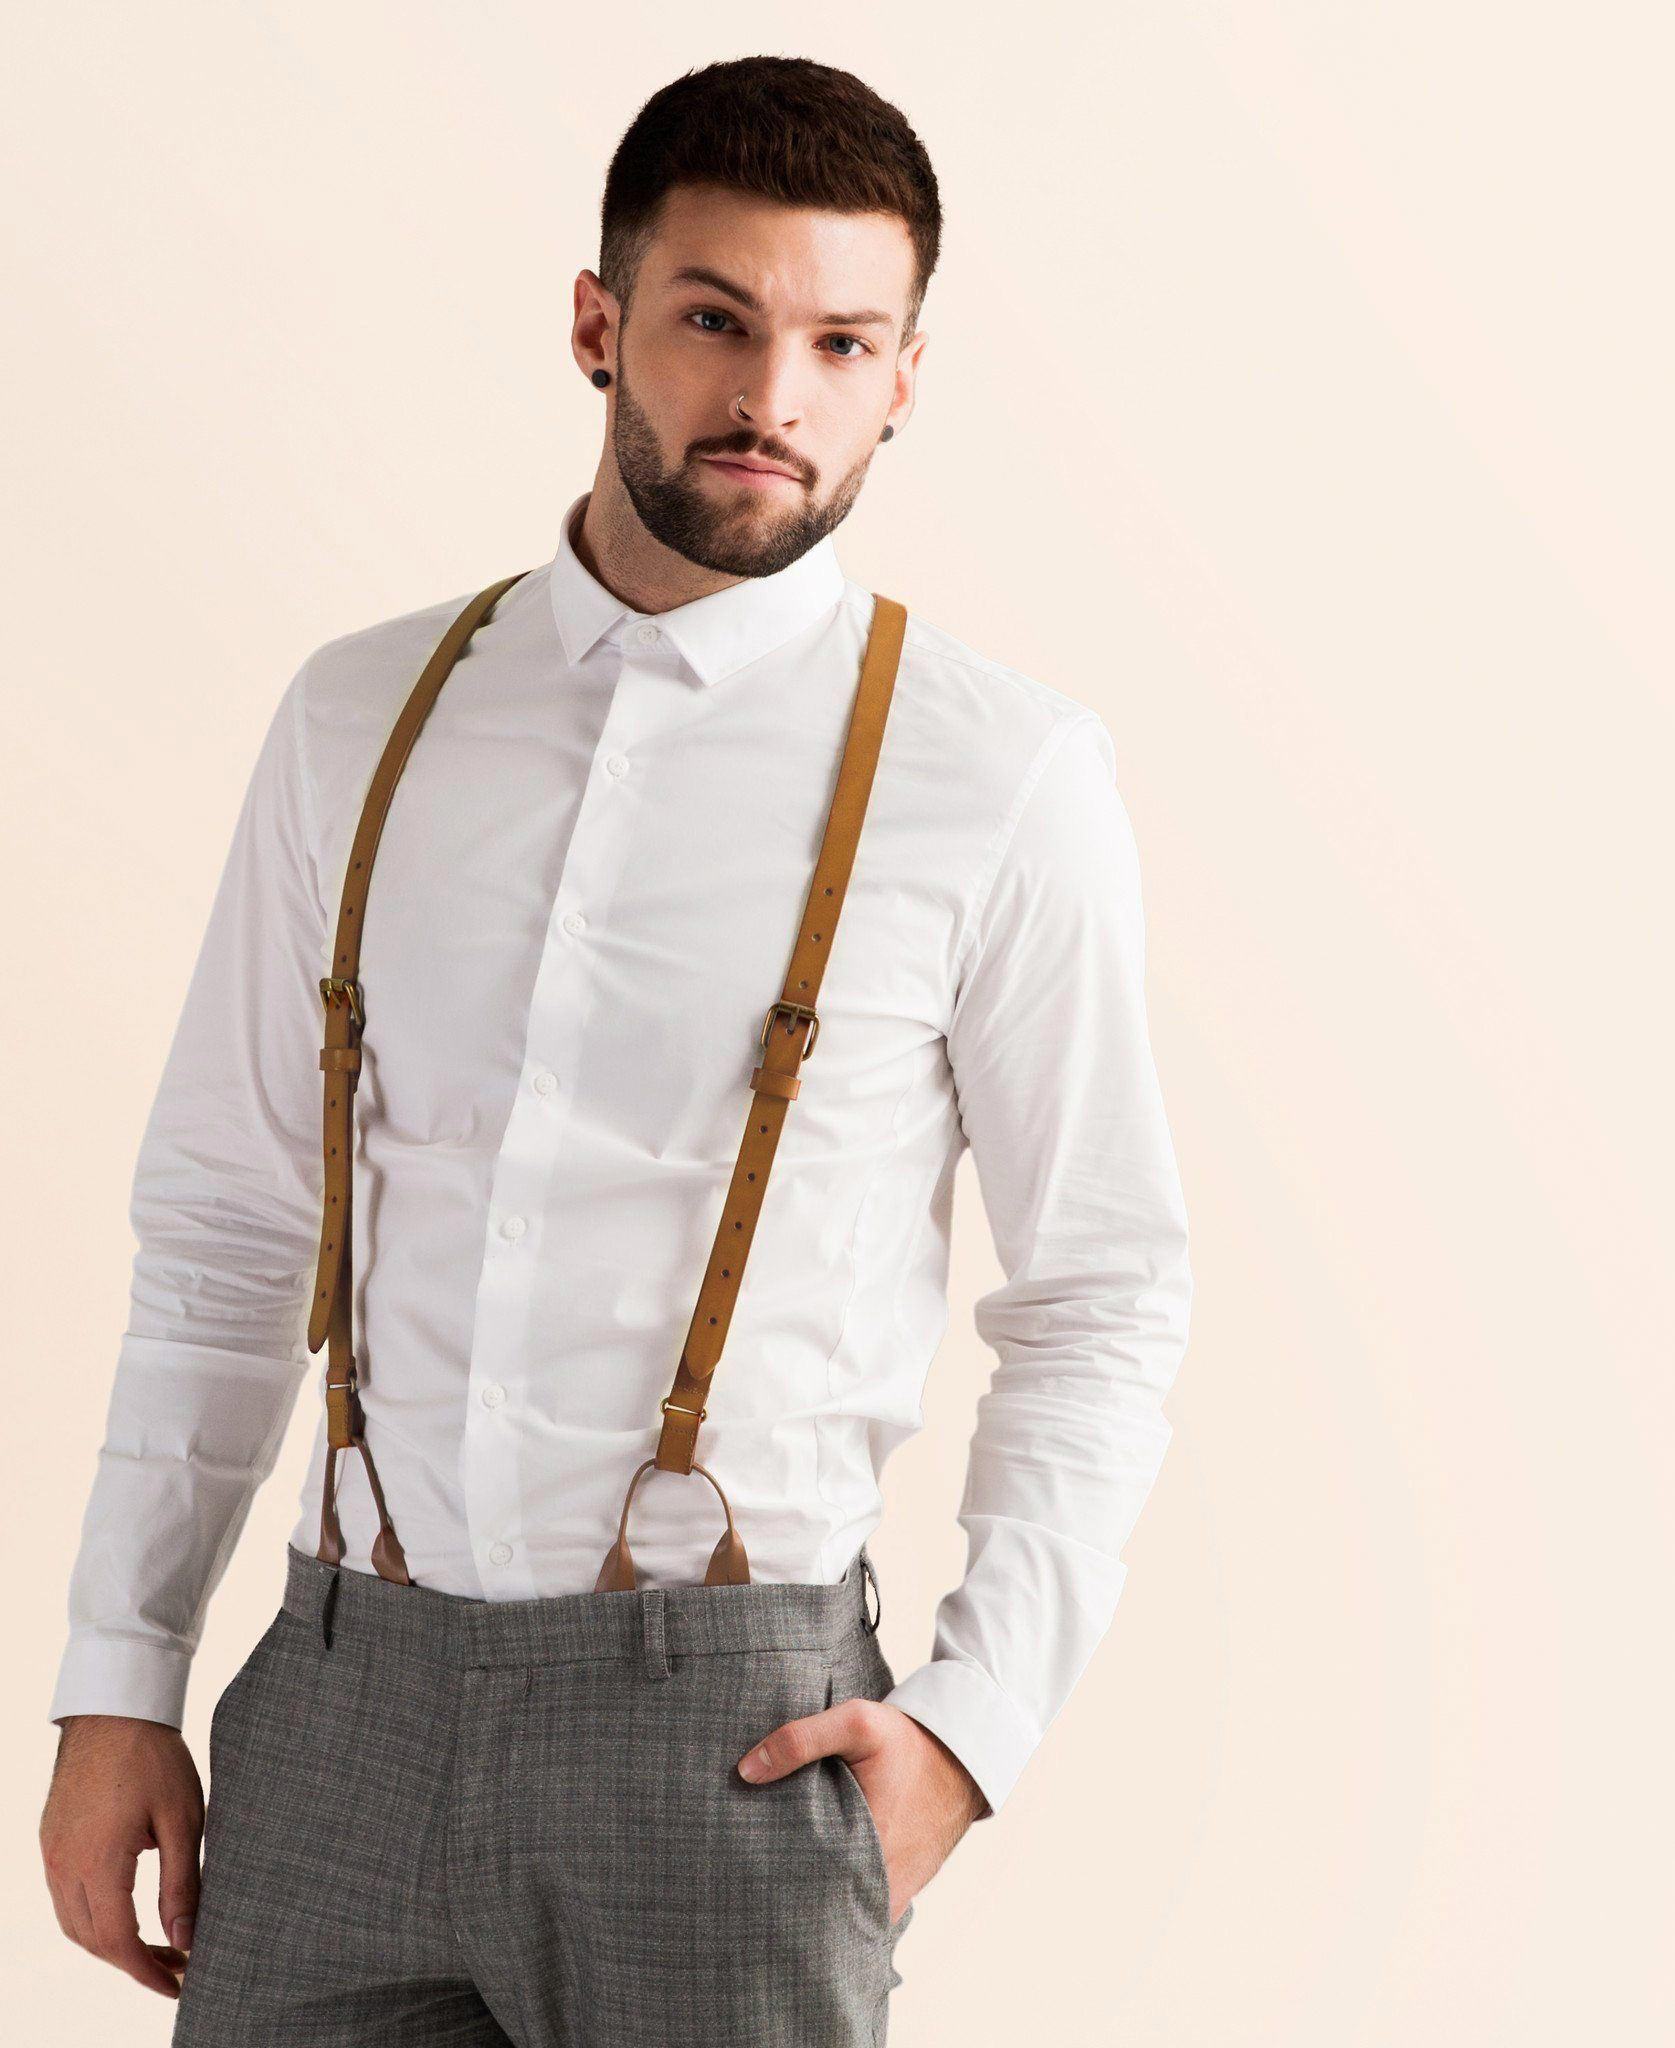 Duluth X-Back Button Suspenders | Duluth Trading Company